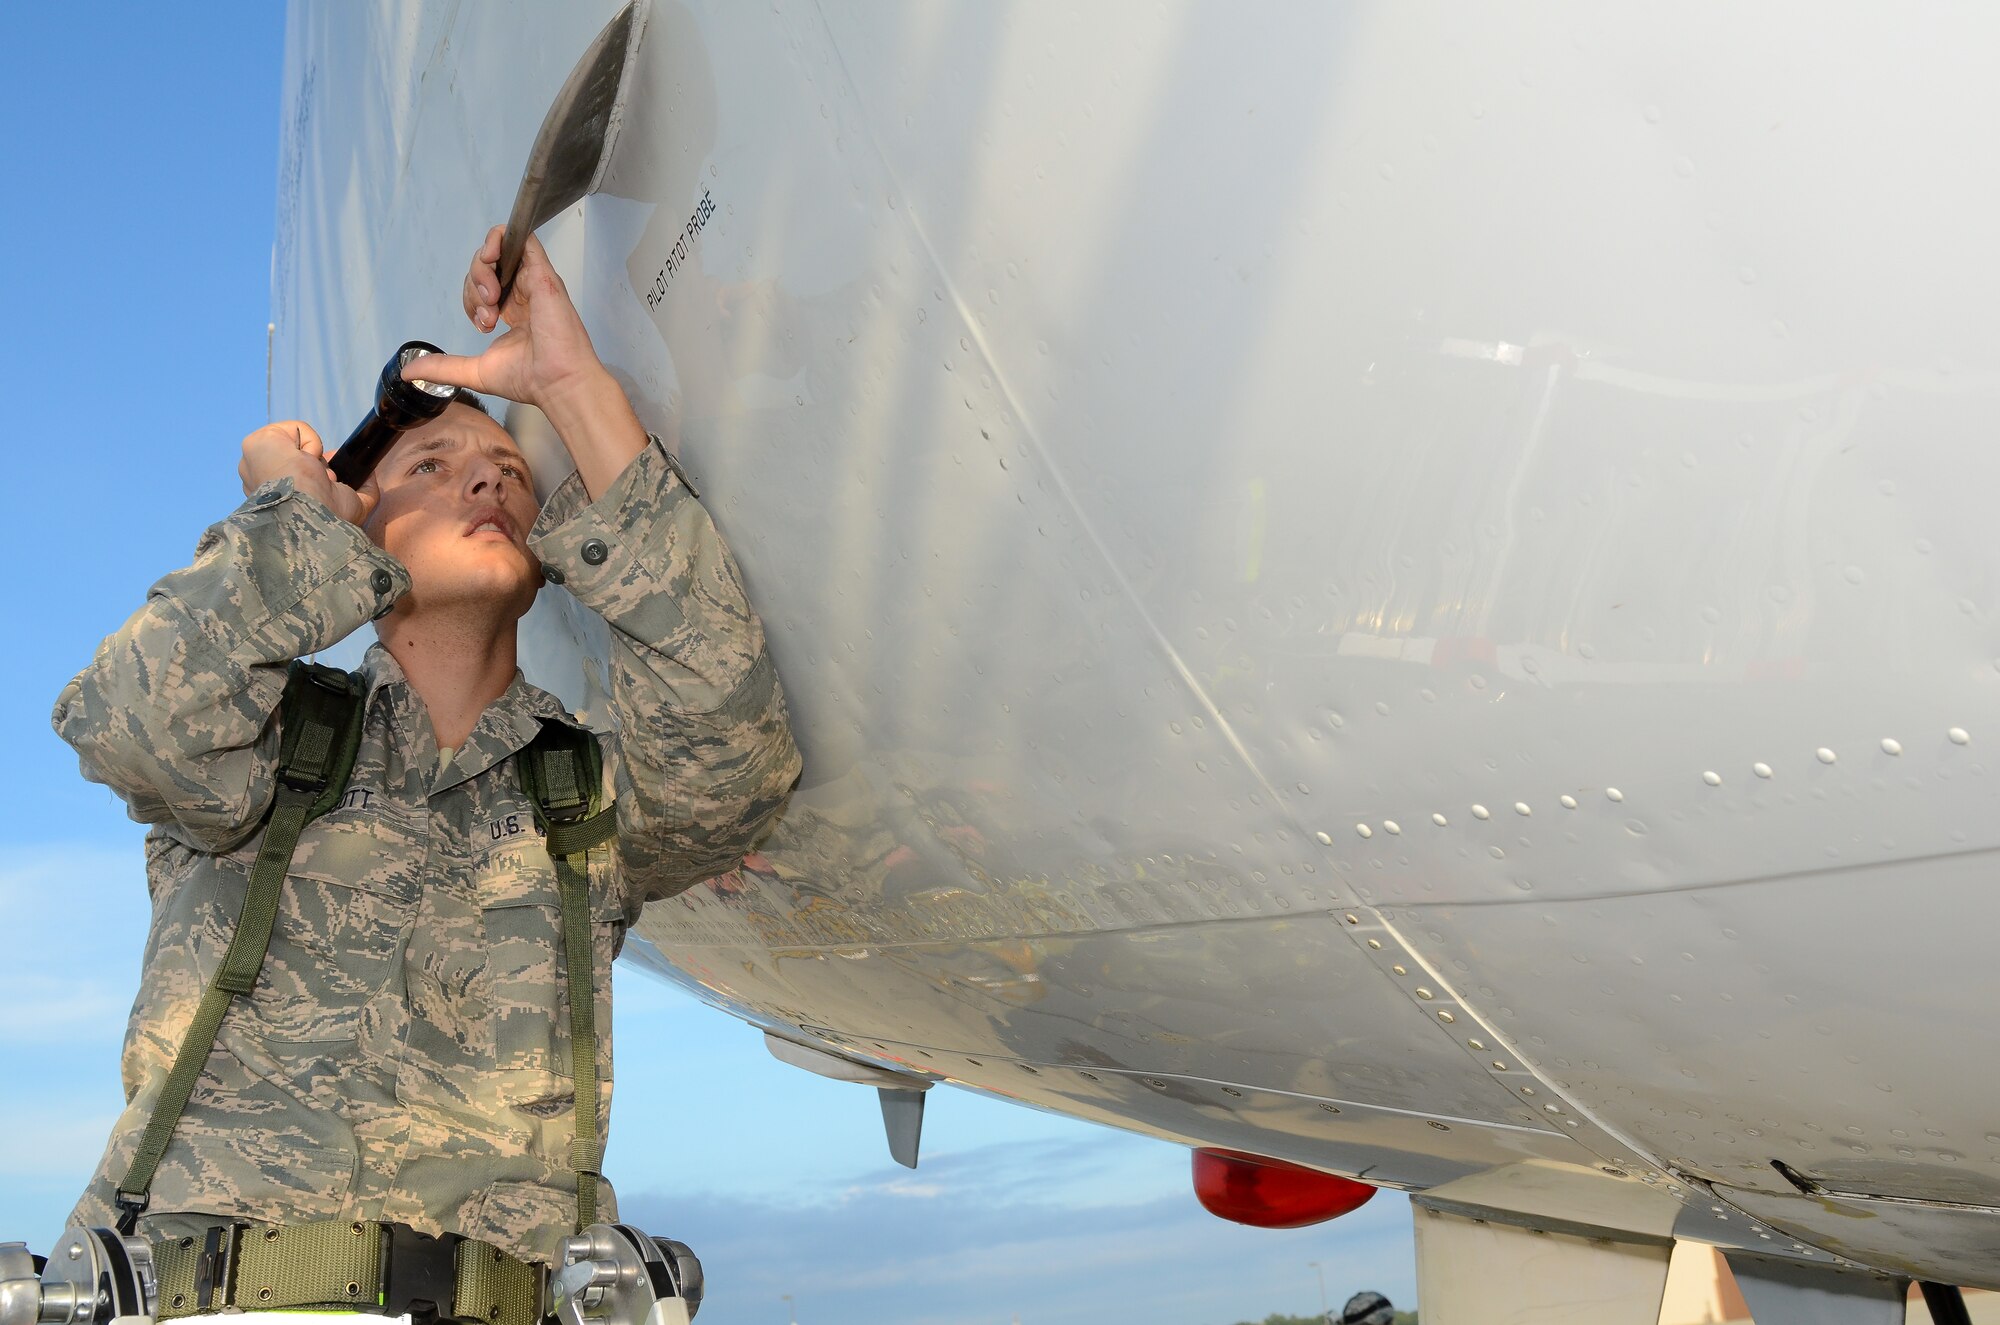 A U.S. Air Force navigator on an E-8C Joint STARS reviews a flight plan prior to a sortie during an operational readiness inspection at Robins Air Force Base, Ga., Sept. 8, 2012.  Airmen from the 116th and 461st ACW are showcasing their ability to perform assigned tasks in wartime, contingency or force sustainment operation. Inspection areas include initial response, employment, mission support and ability-to-survive and operate in a chemical environment. (National Guard photo by Master Sgt. Roger Parsons/Released)